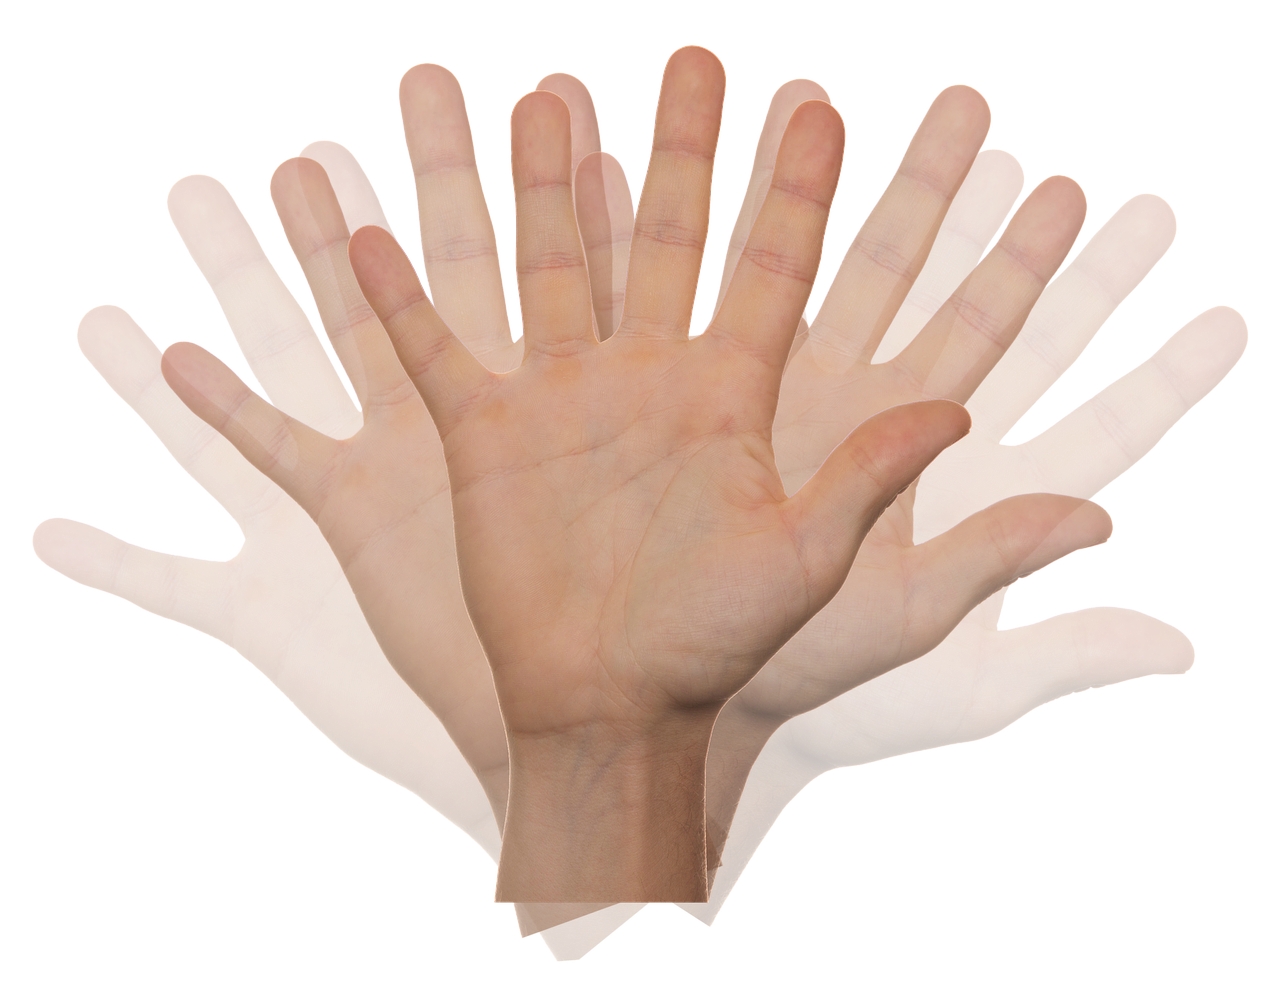 Image result for publi8c domain  hand waving hello